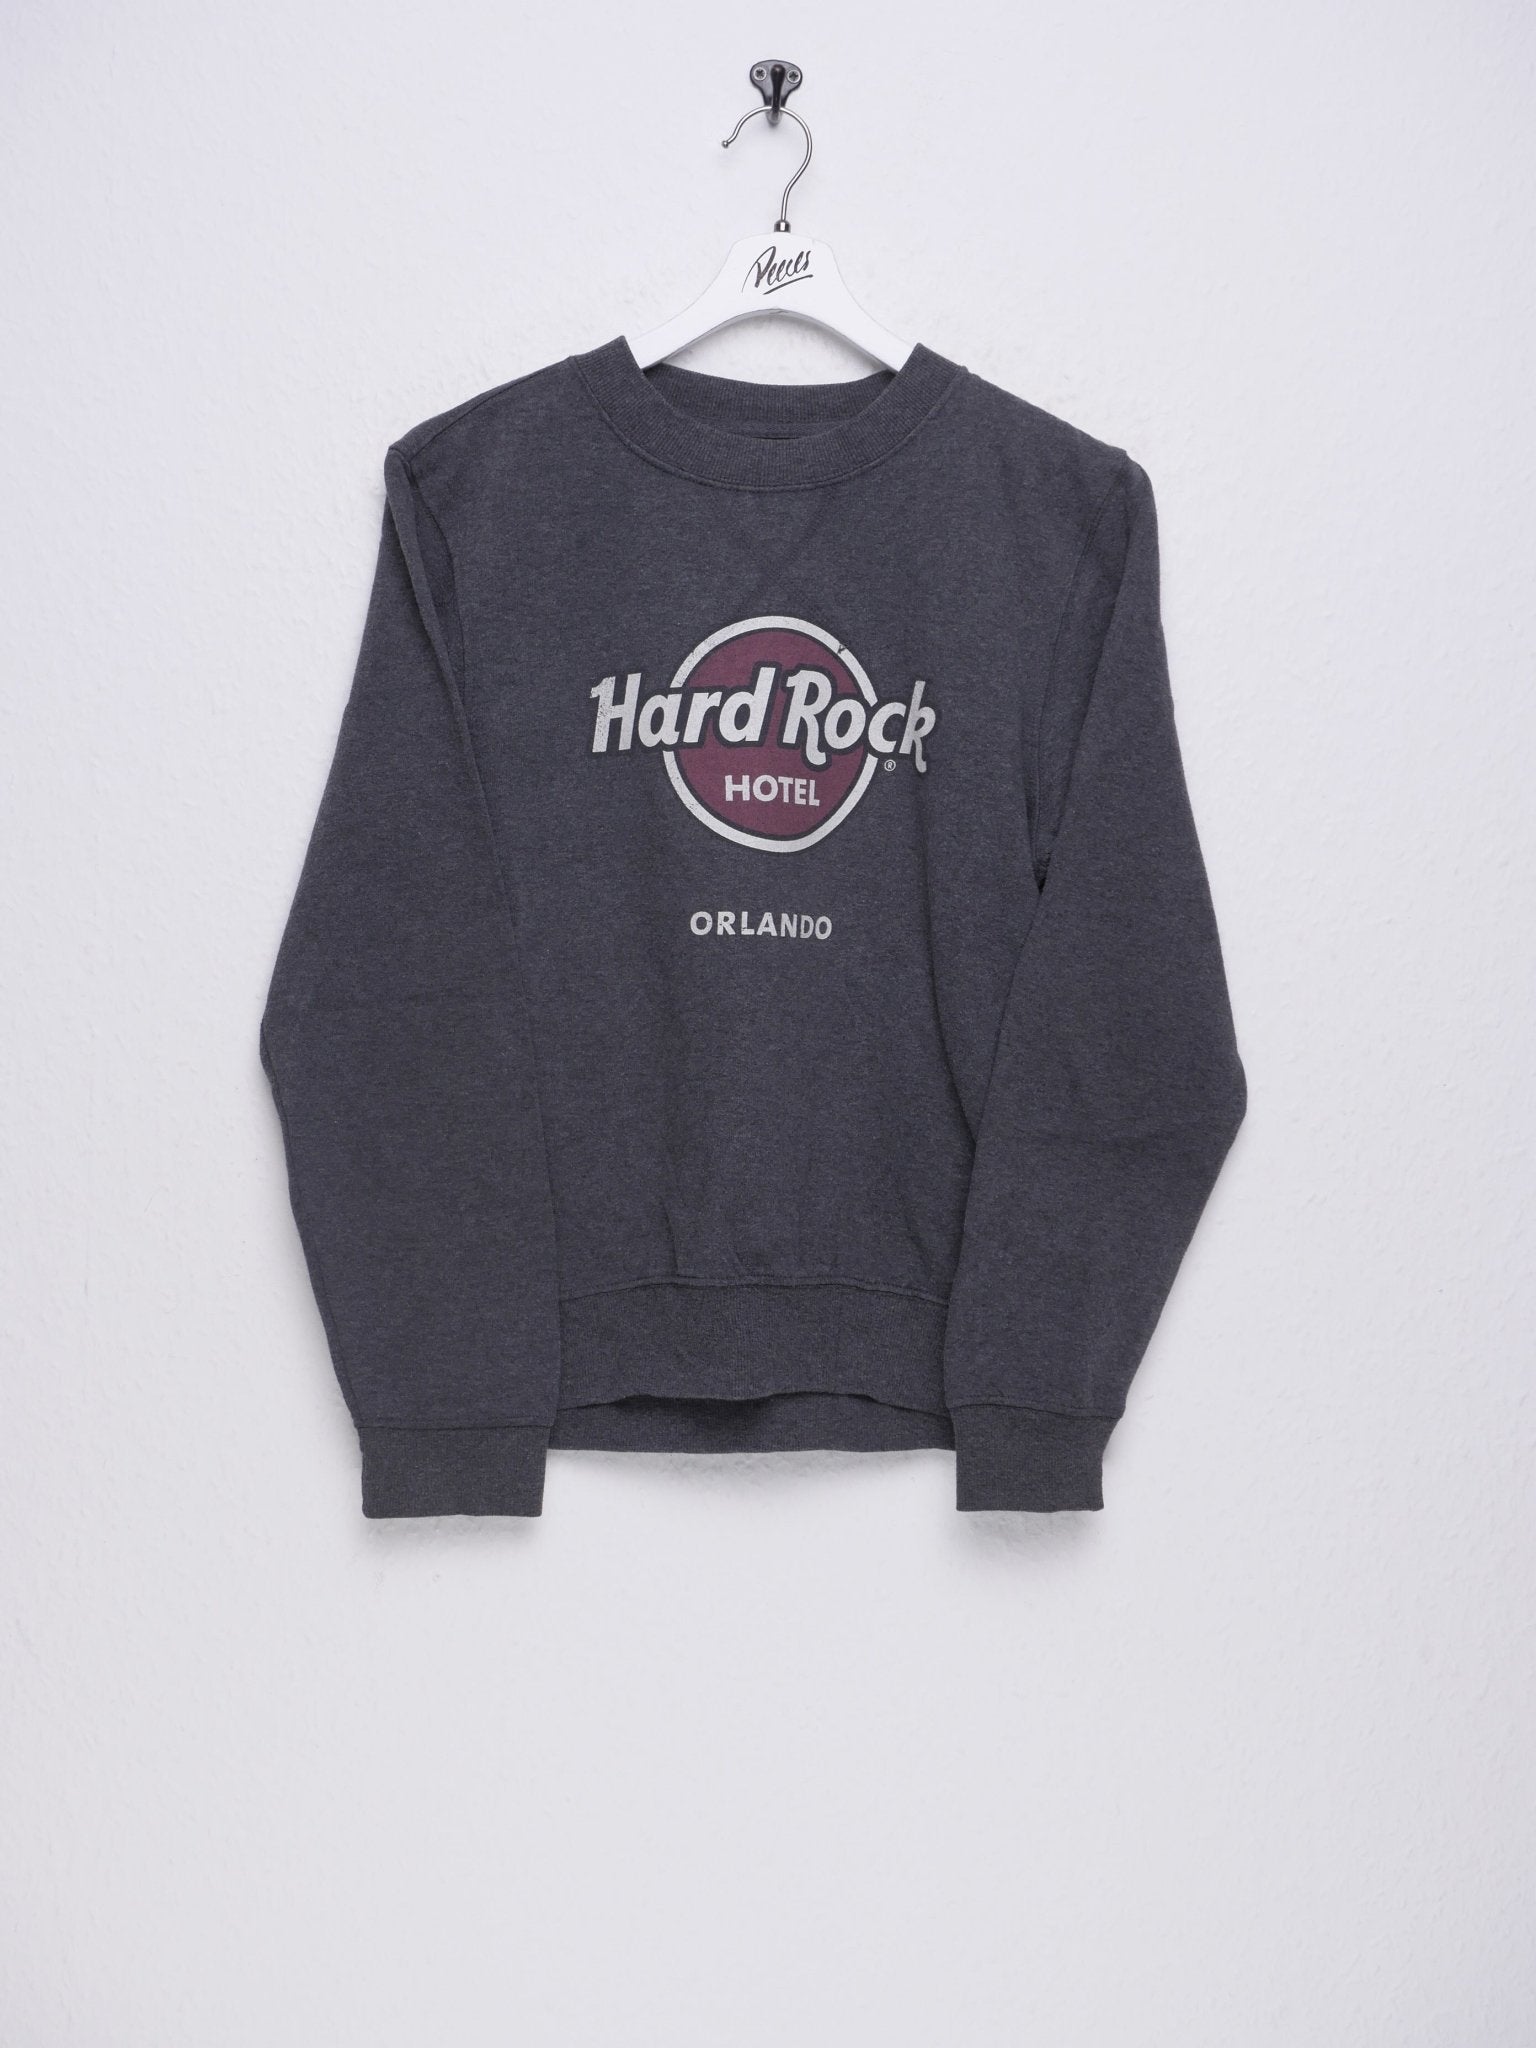 Hard Rock Hotel printed Graphic Vintage Sweater - Peeces